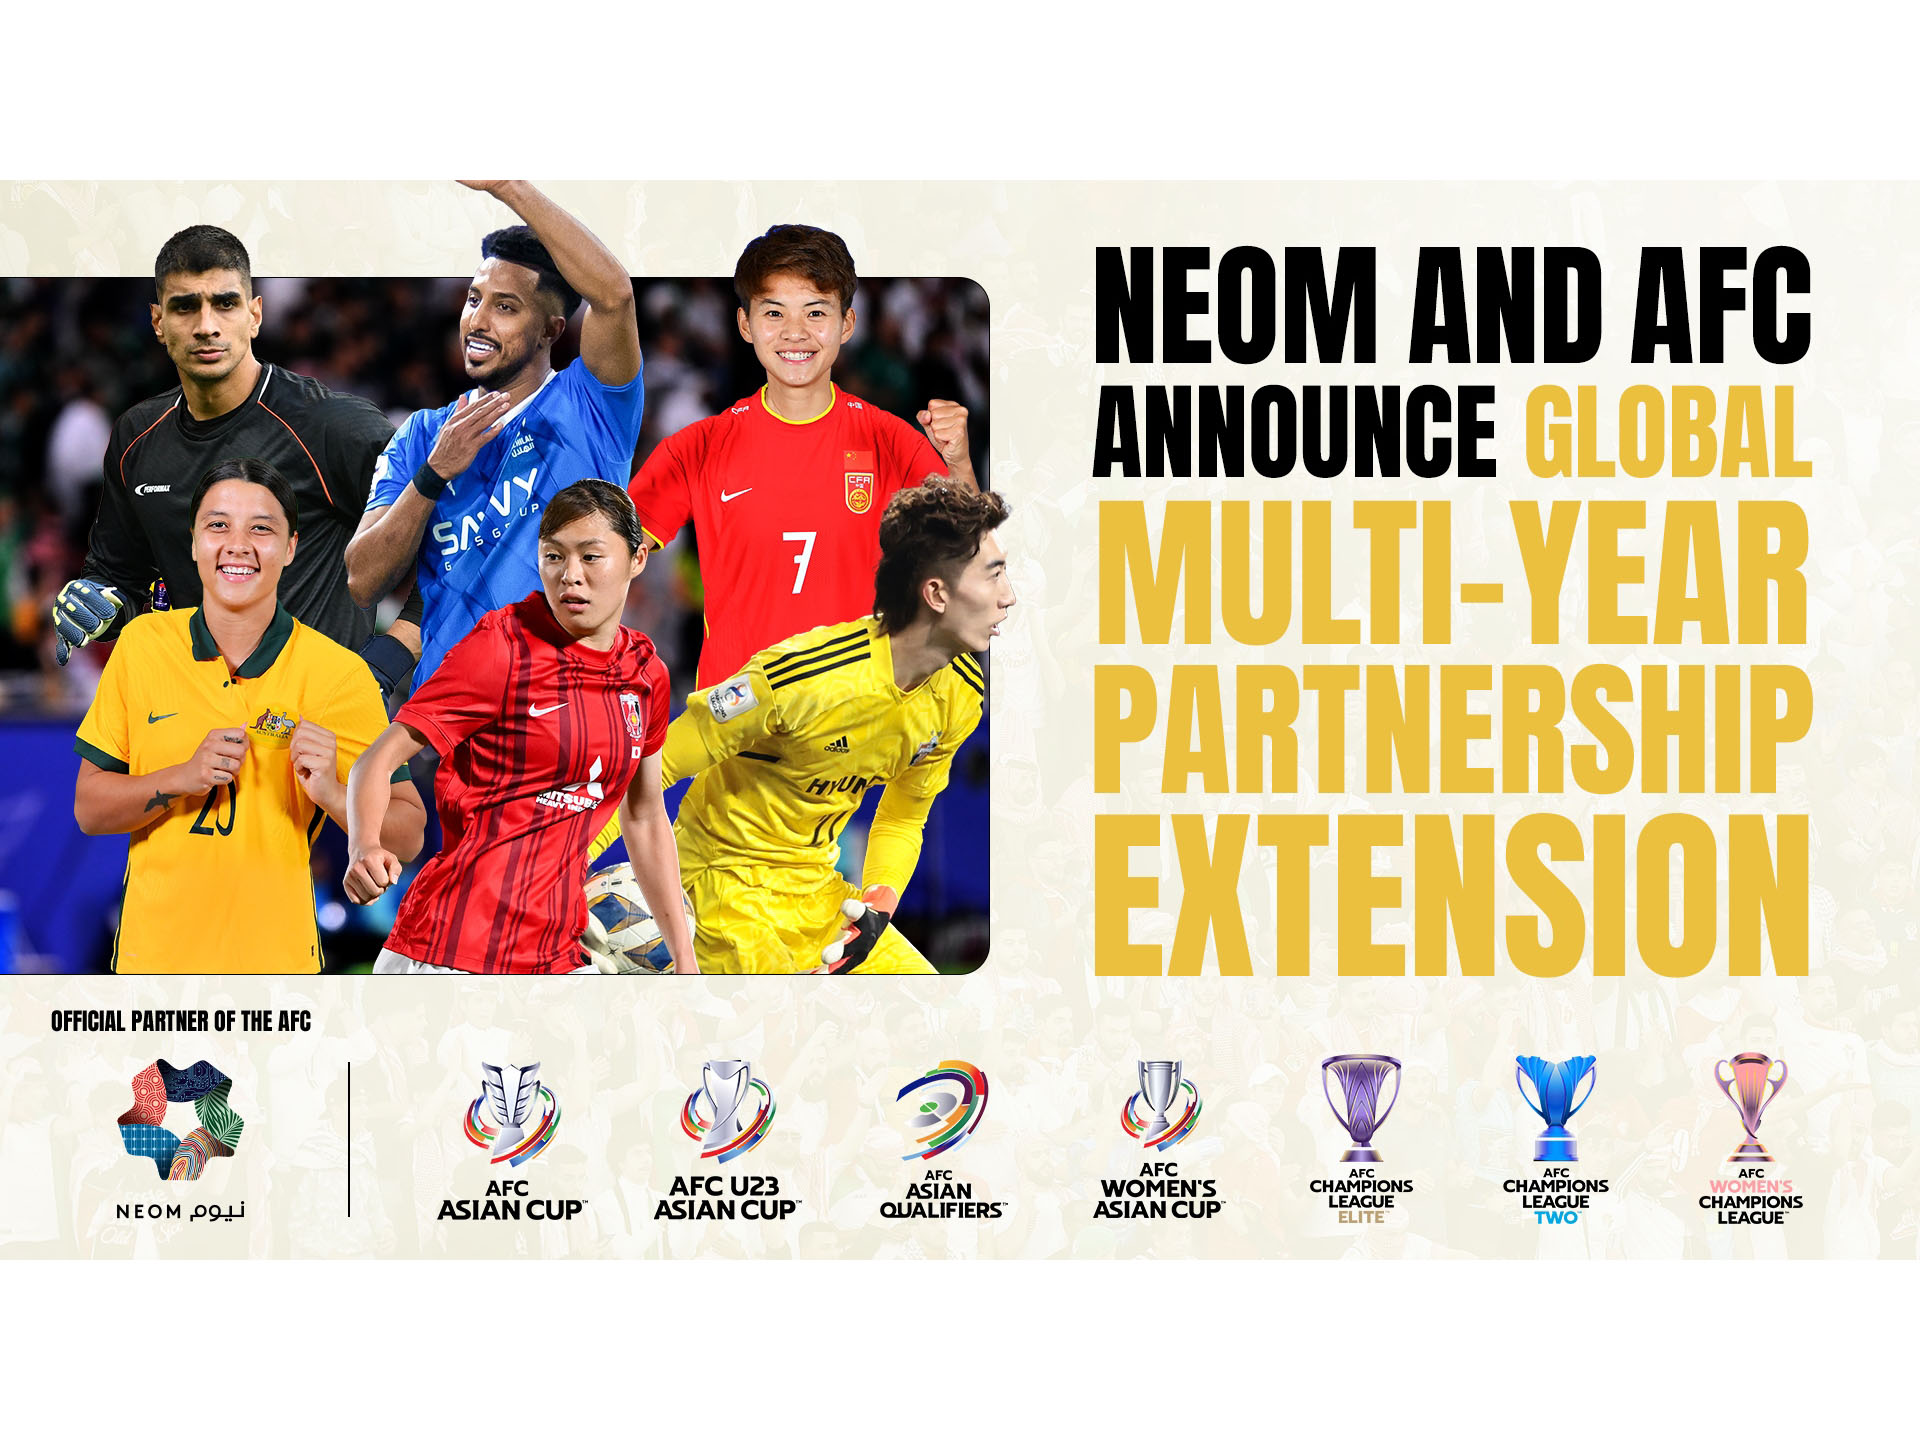 NEOM and AFC extend global multi-year partnership